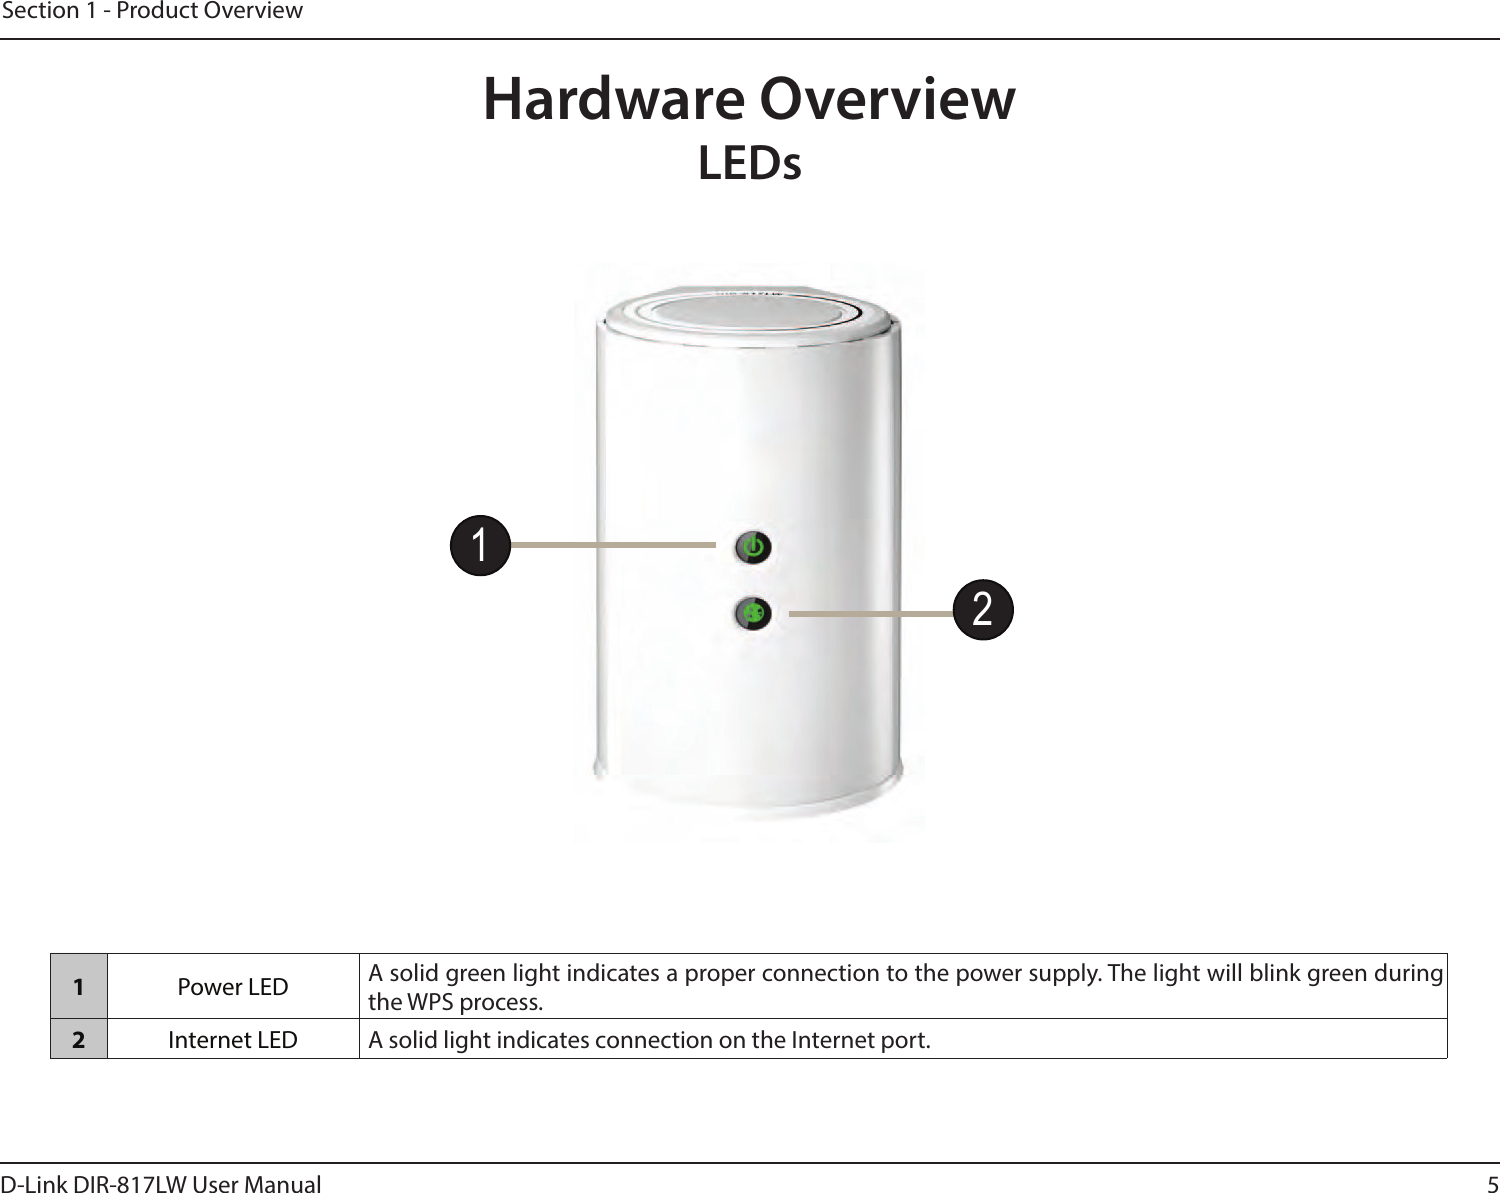 5D-Link DIR-817LW User ManualSection 1 - Product OverviewHardware OverviewLEDs1Power LED A solid green light indicates a proper connection to the power supply. The light will blink green during the WPS process.2Internet LED A solid light indicates connection on the Internet port. 21